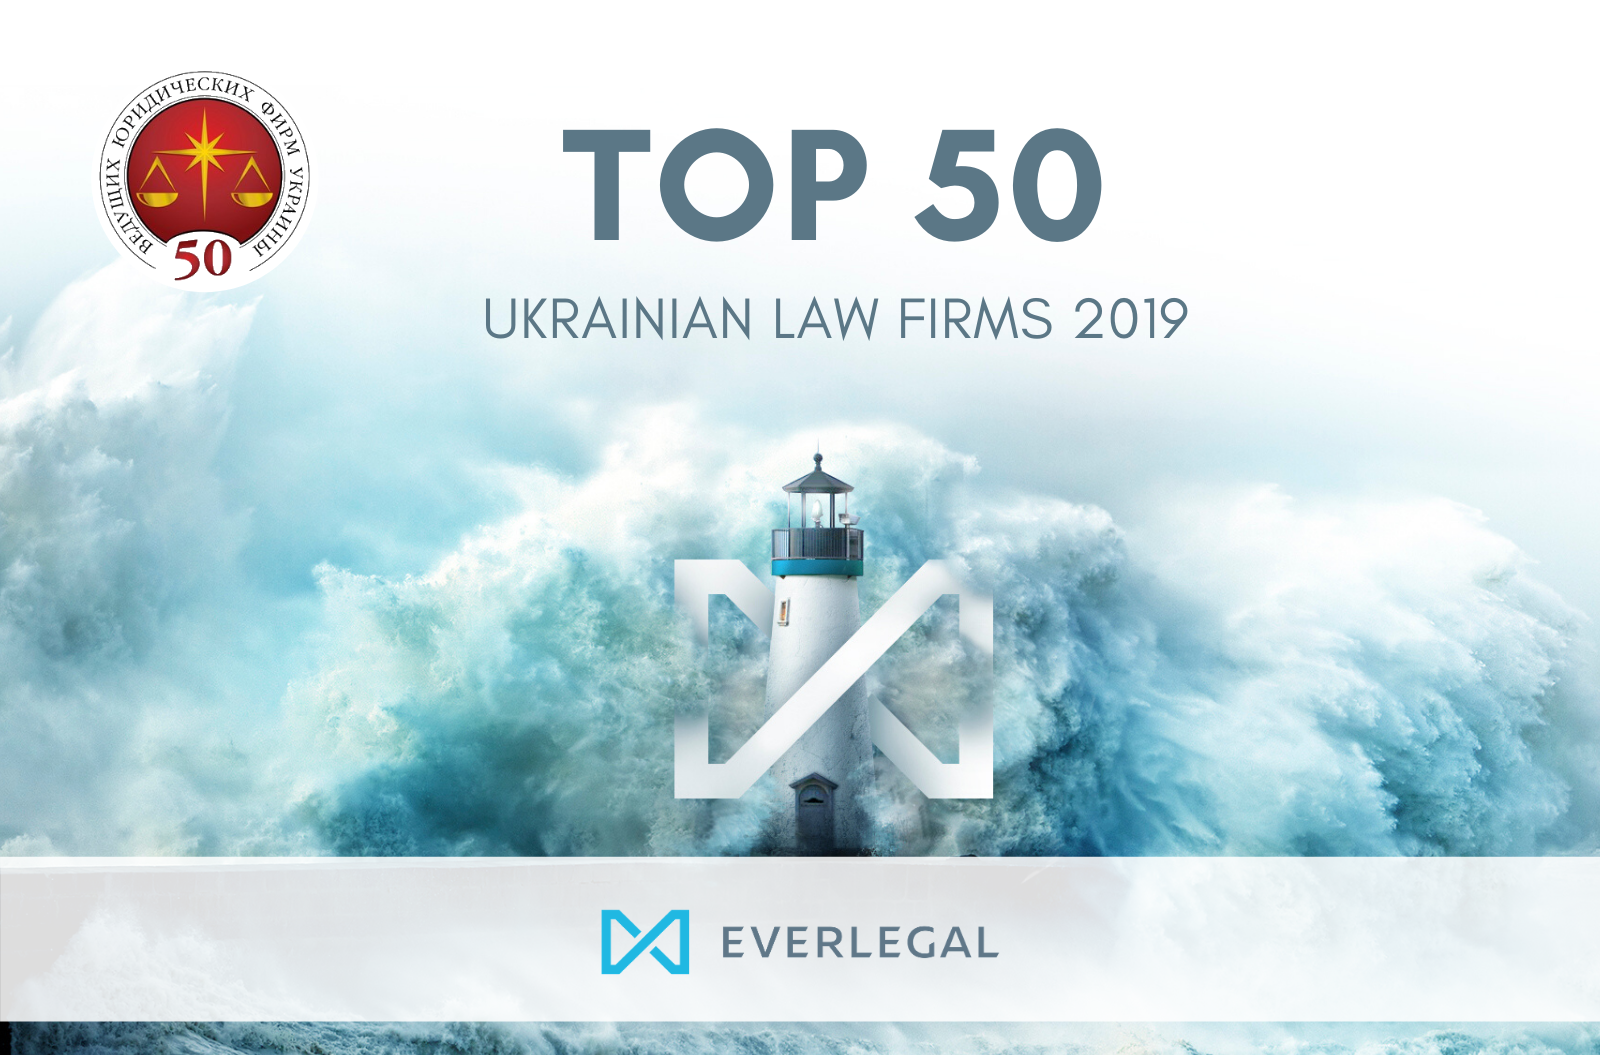 EVERLEGAL is a TOP 20 Ukrainian Law Firm 2019